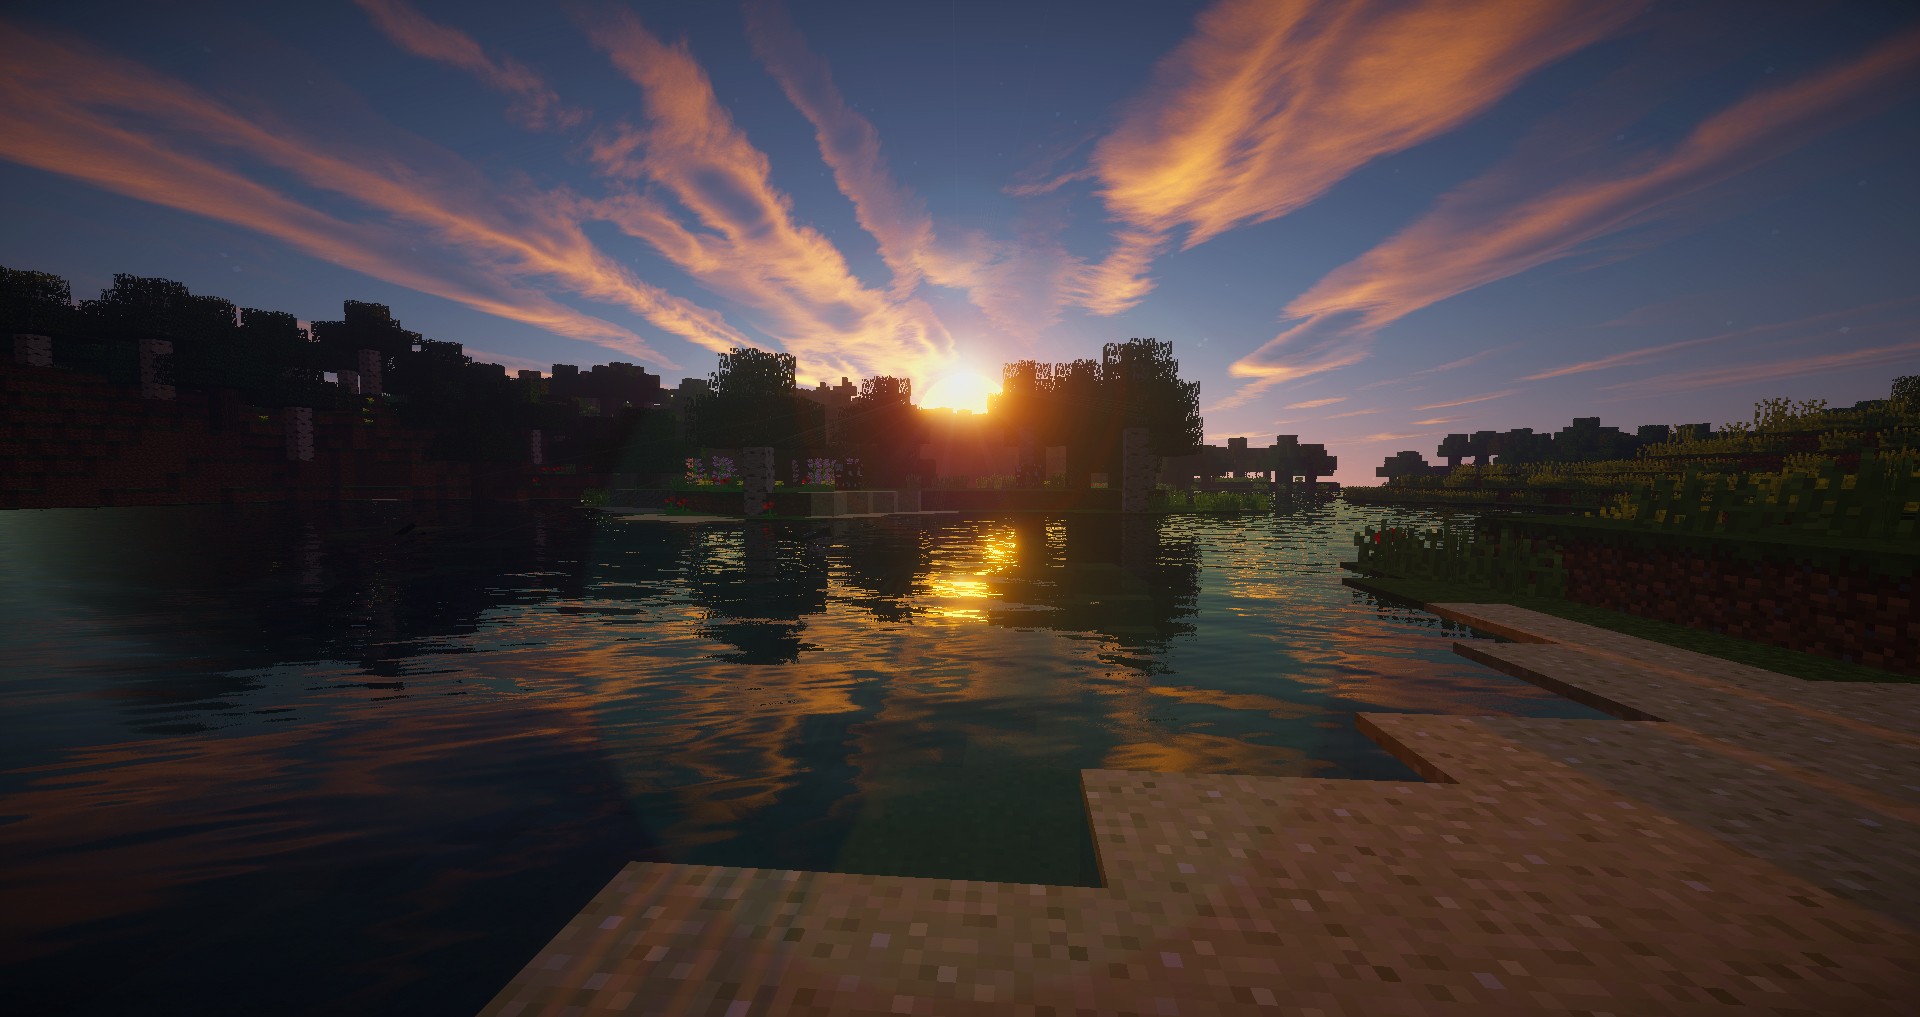 If you're looking for the best Shaders for Minecraft, you'll find them here!